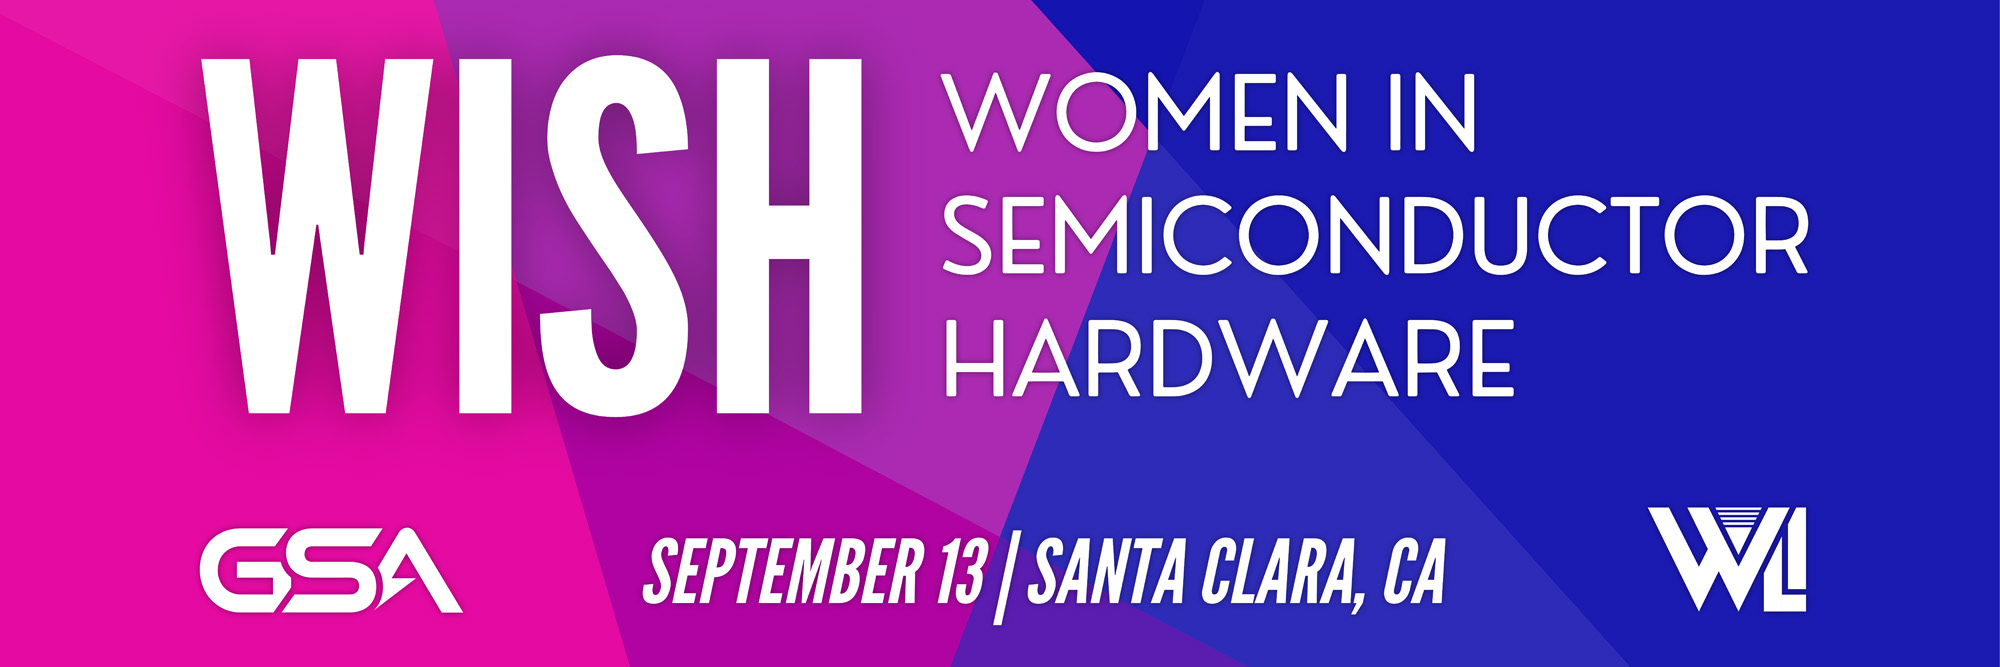 WISH (Women in Semiconductor Hardware) Conference